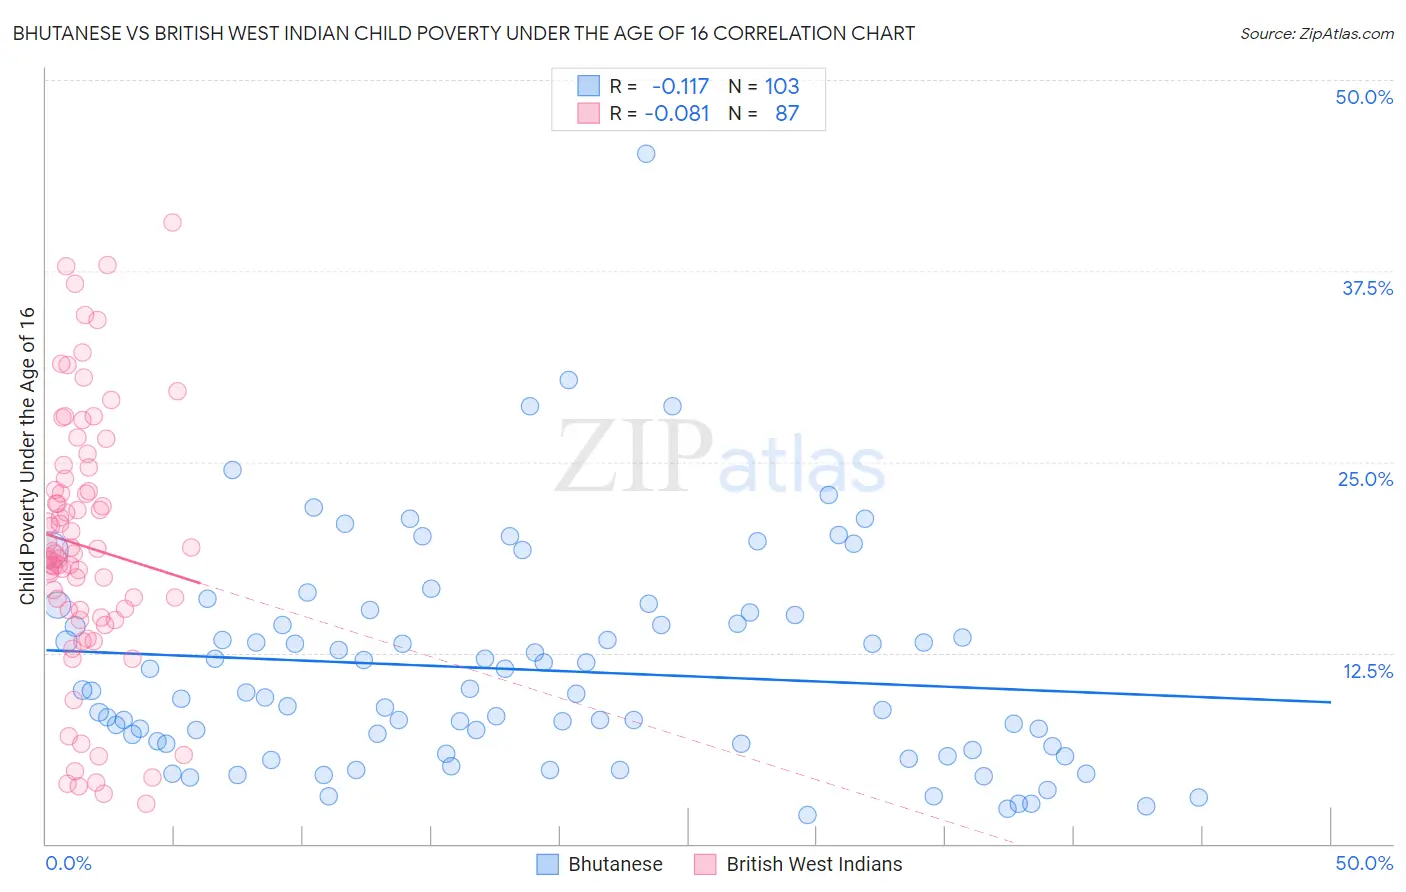 Bhutanese vs British West Indian Child Poverty Under the Age of 16